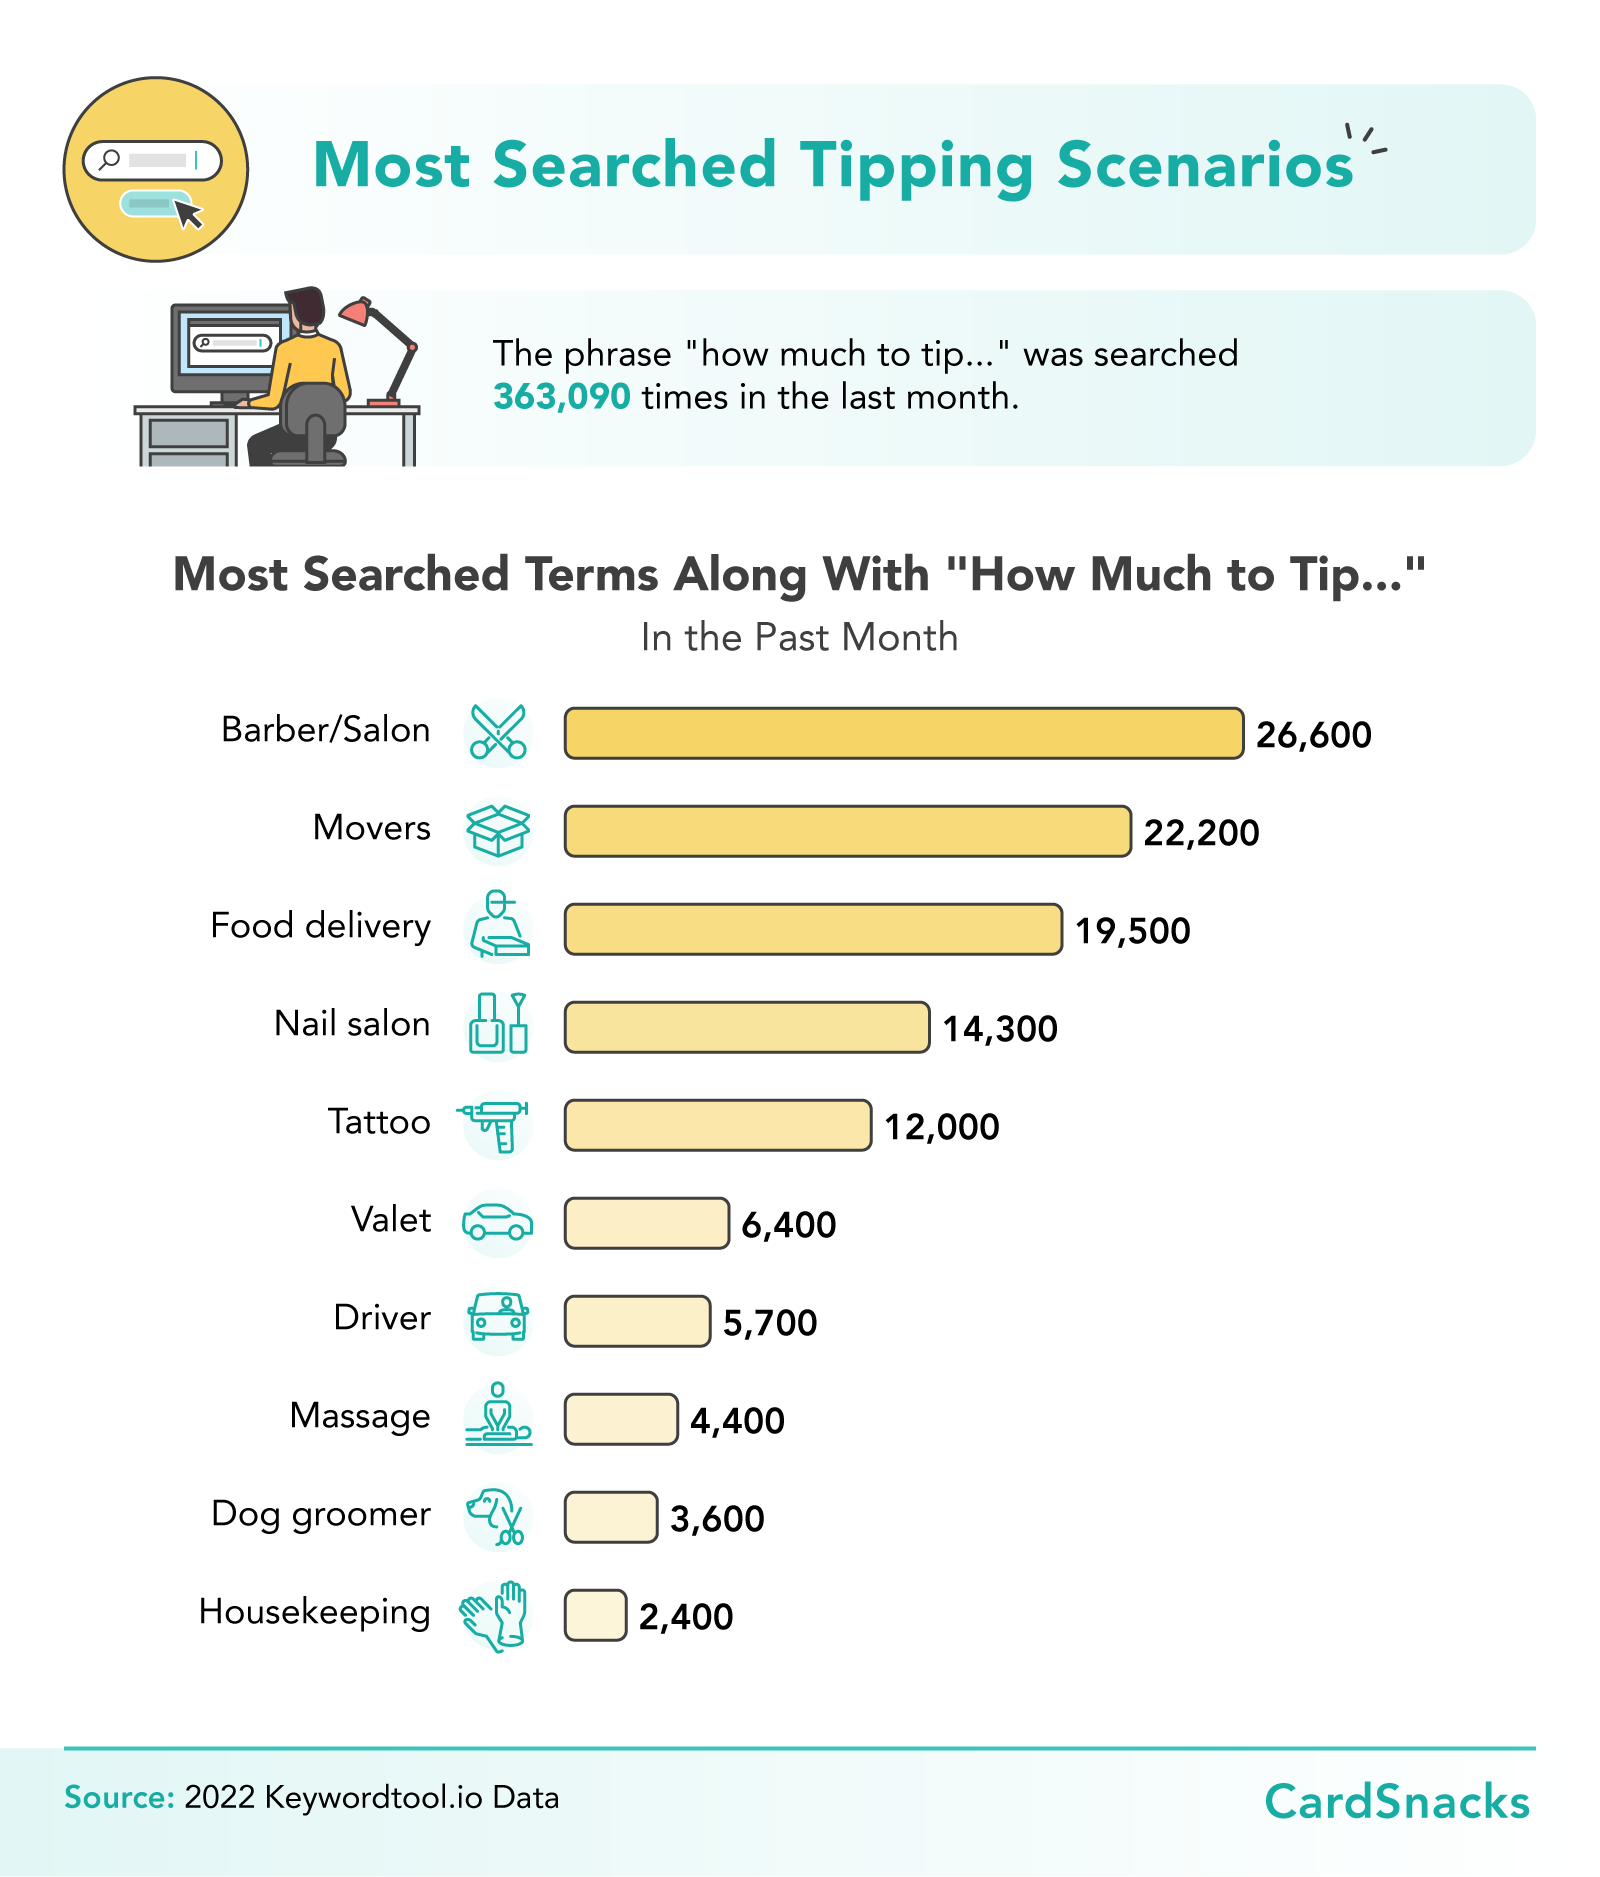 Most searched tipping scenarios